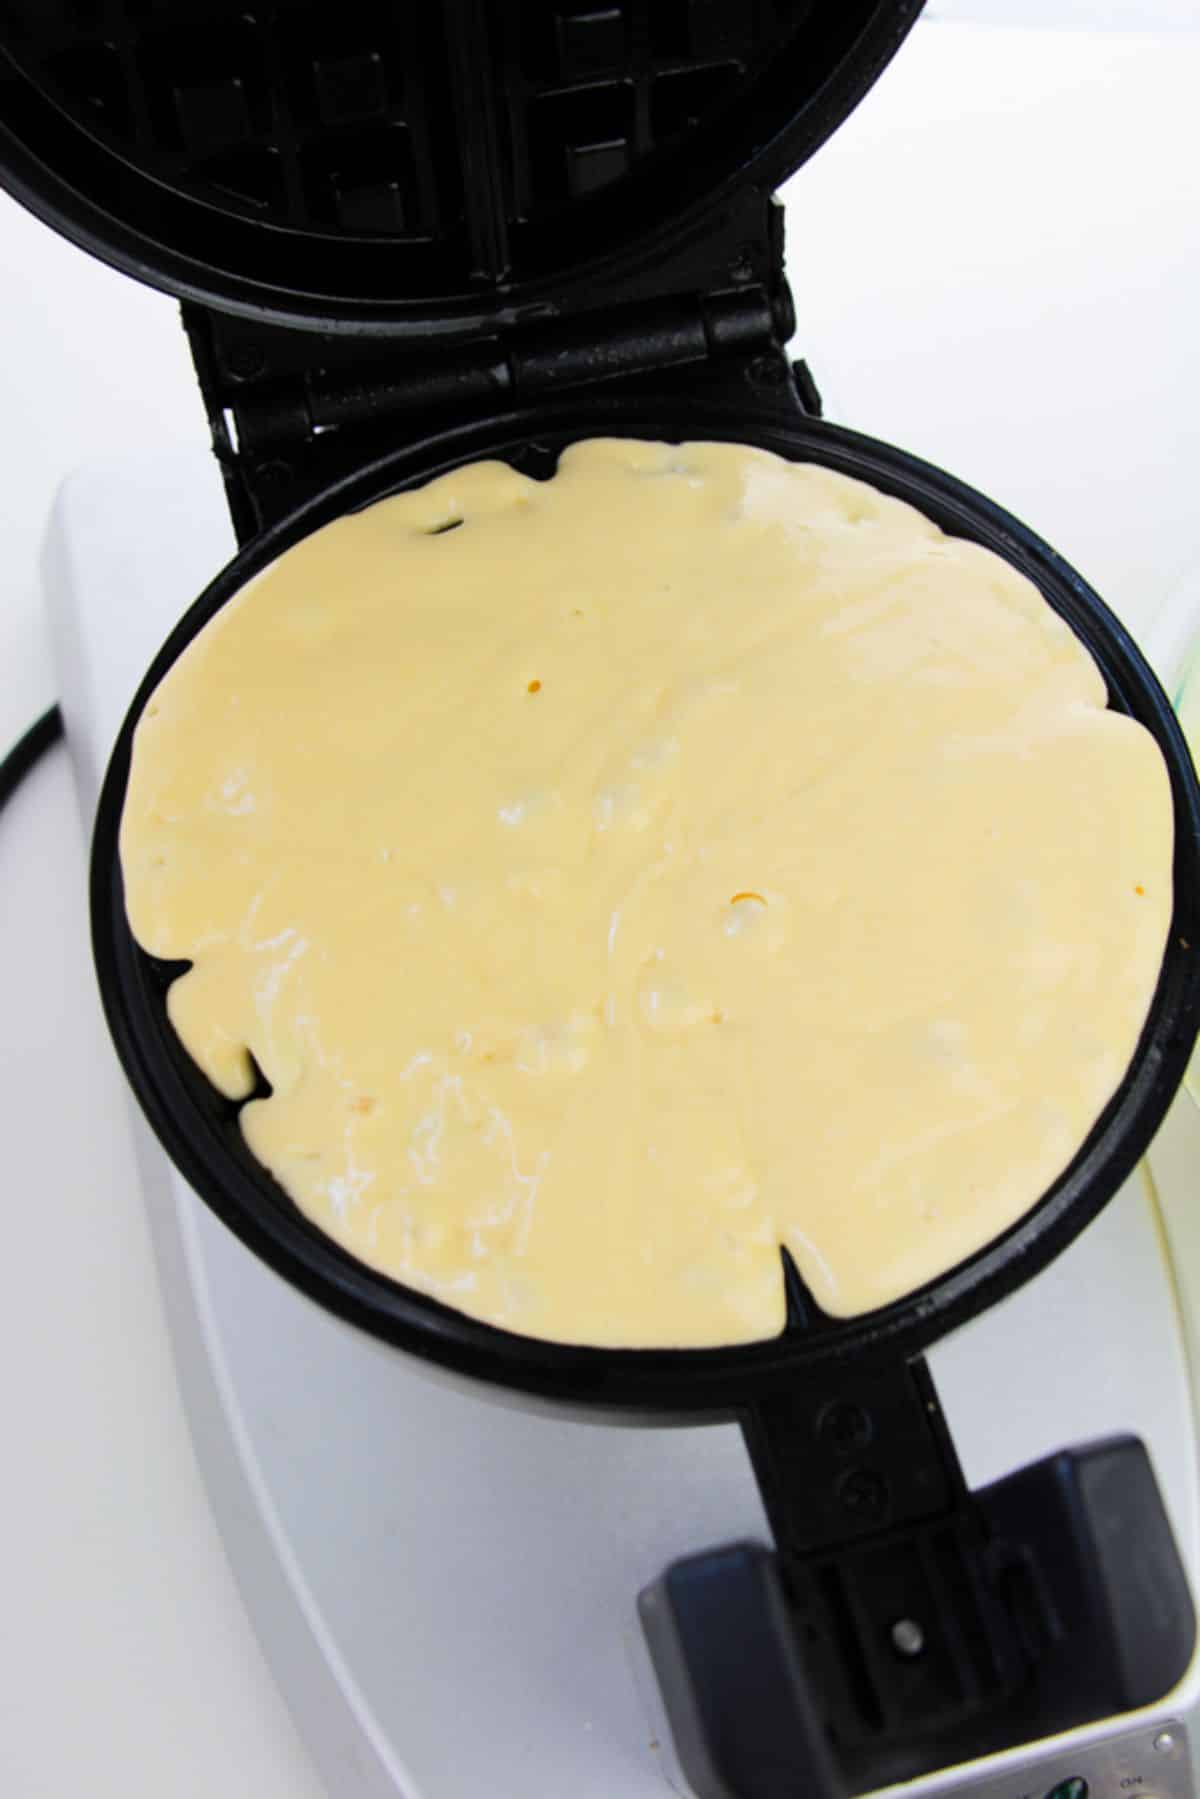 batter in the waffle iron plate.